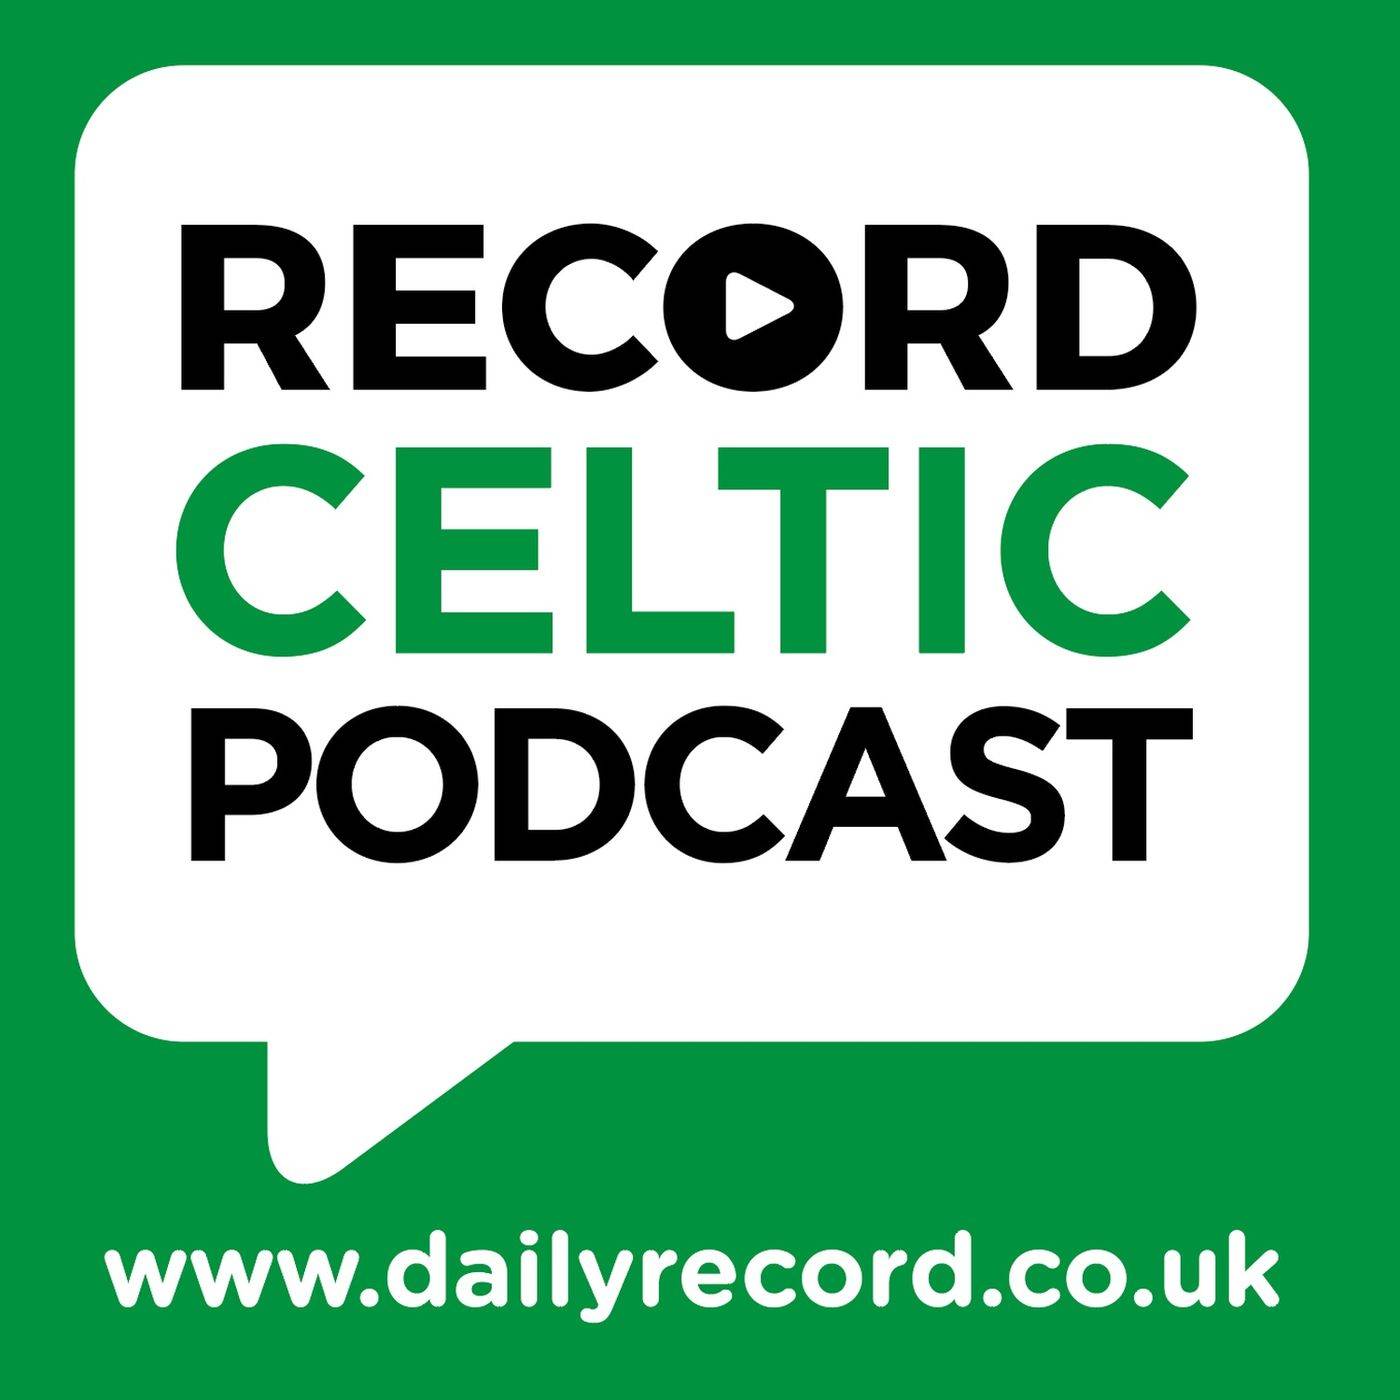 Maeda red card proves VAR is ruining modern football | How can Celtic’s board improve woeful Champions League record? | Dembele is best striker since Henrik Larsson